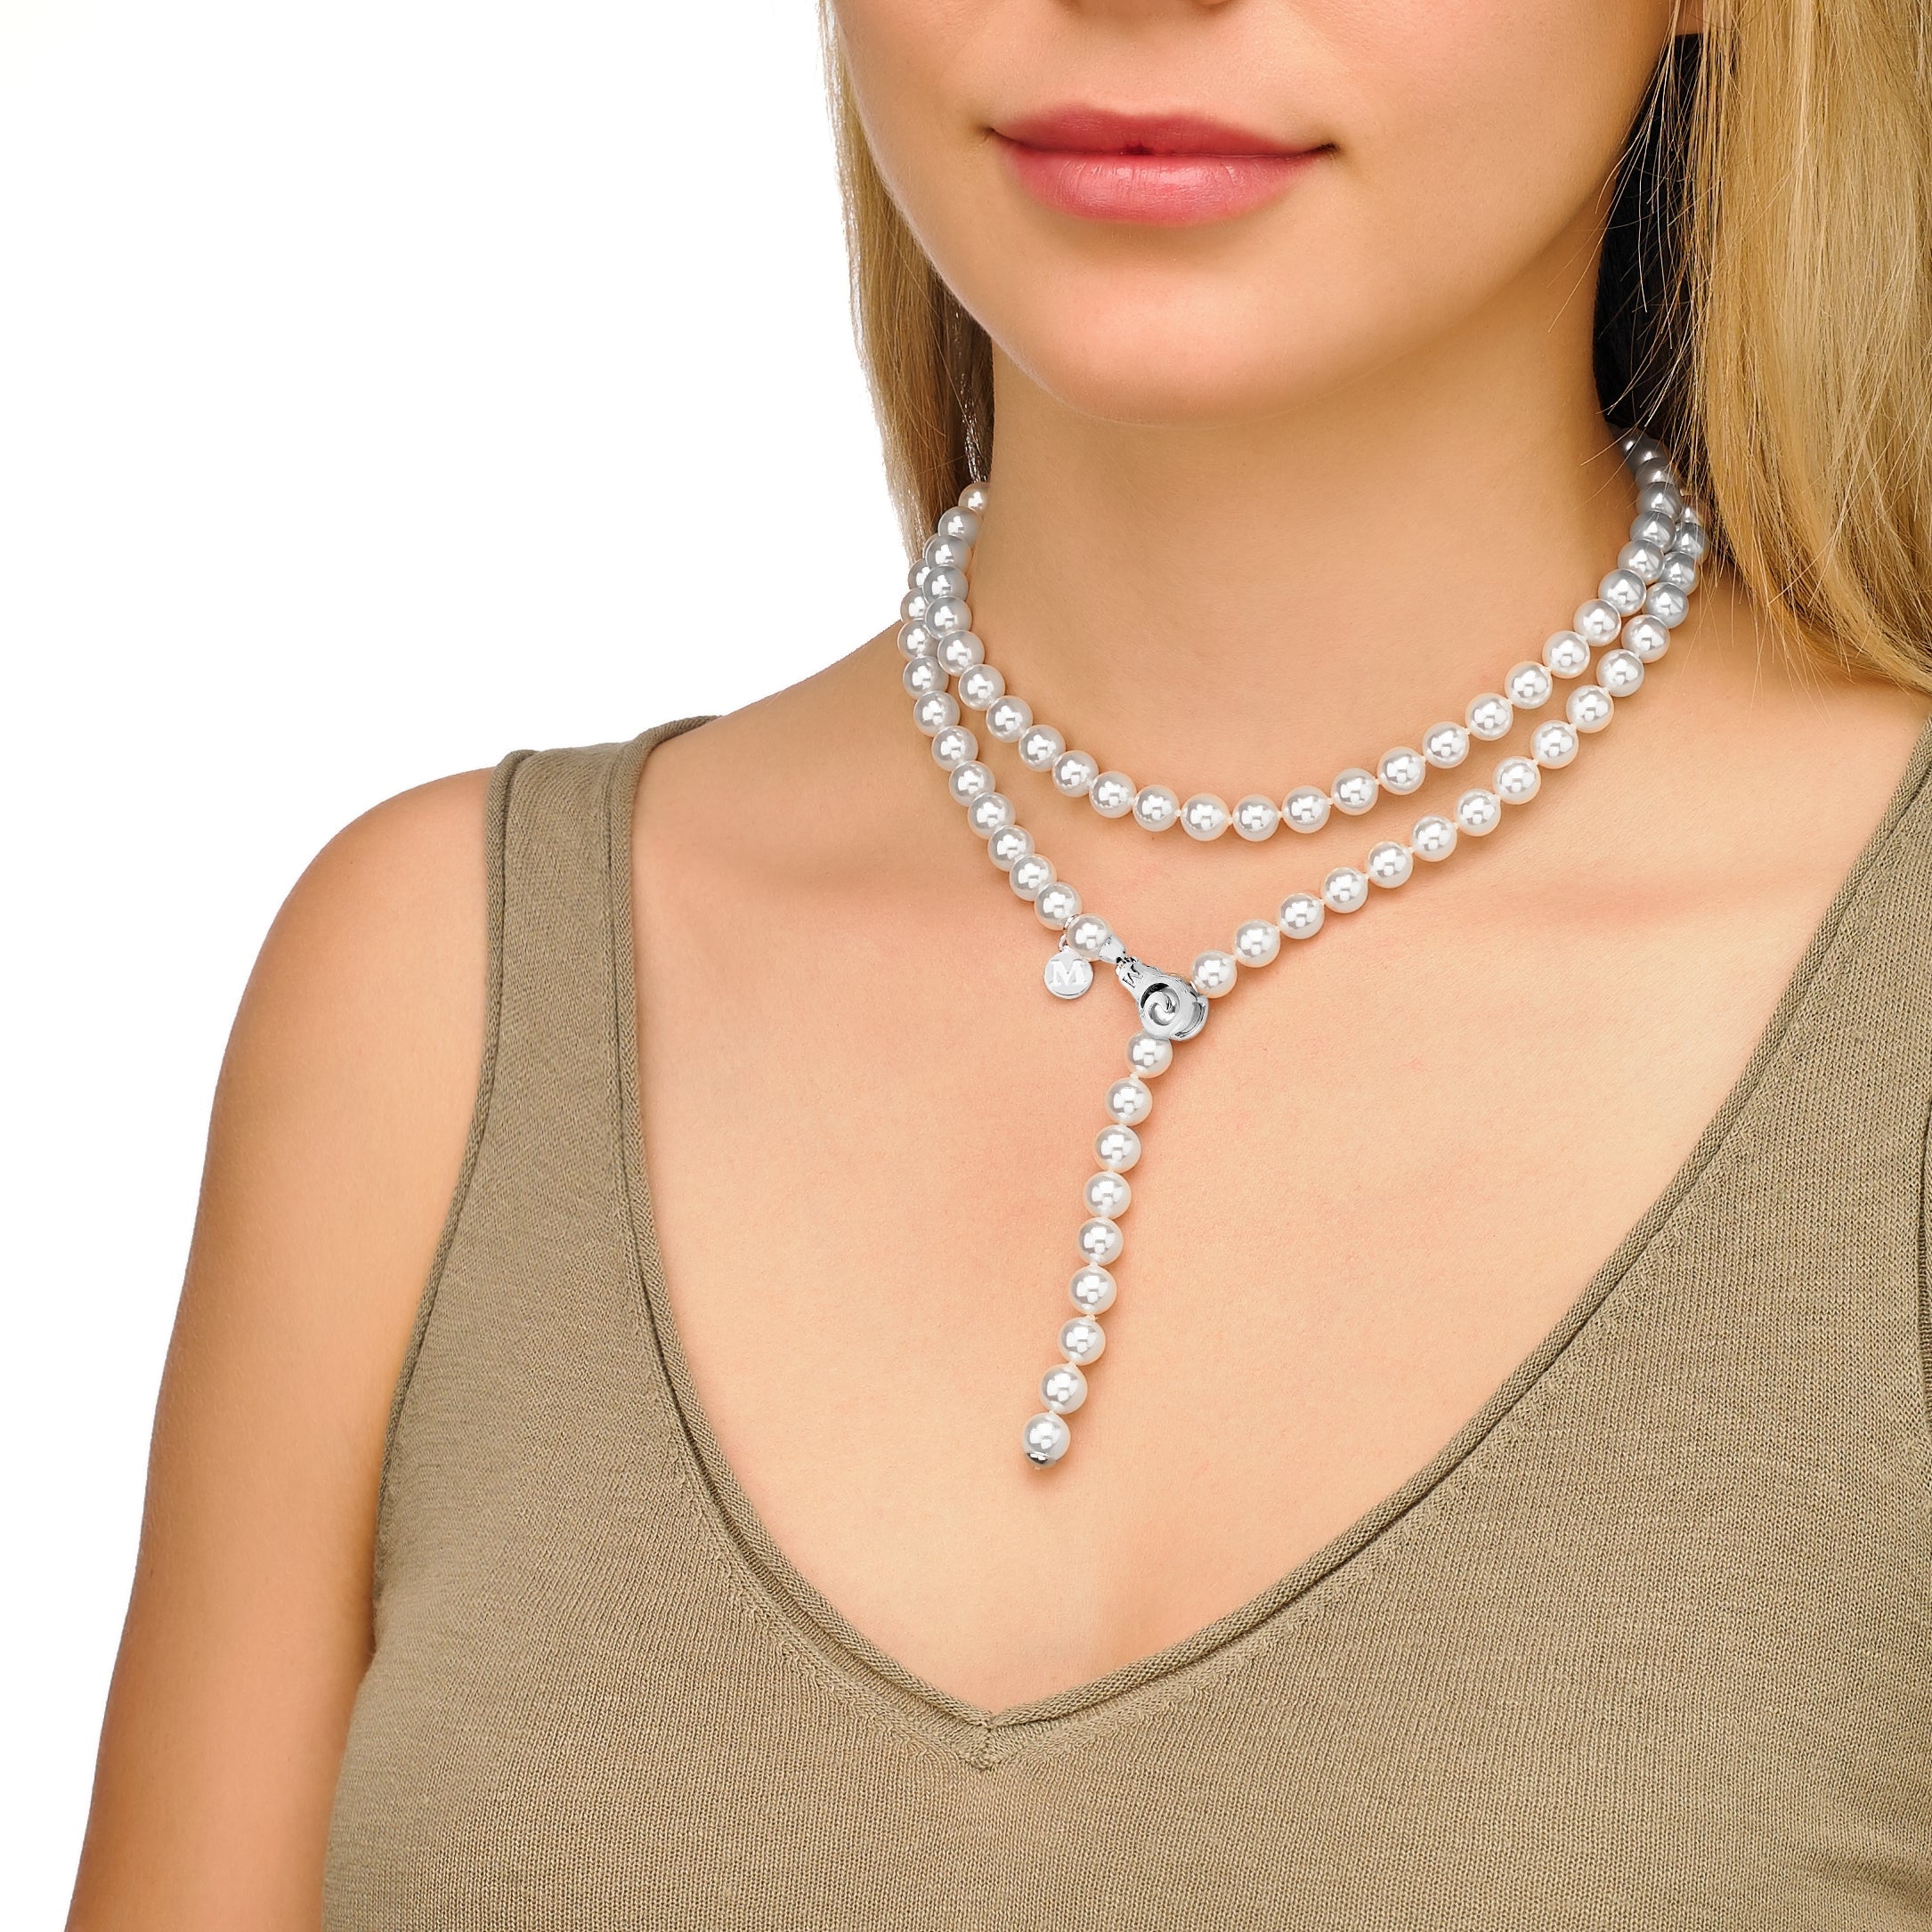 How to wear long pearl necklace - Majorica News